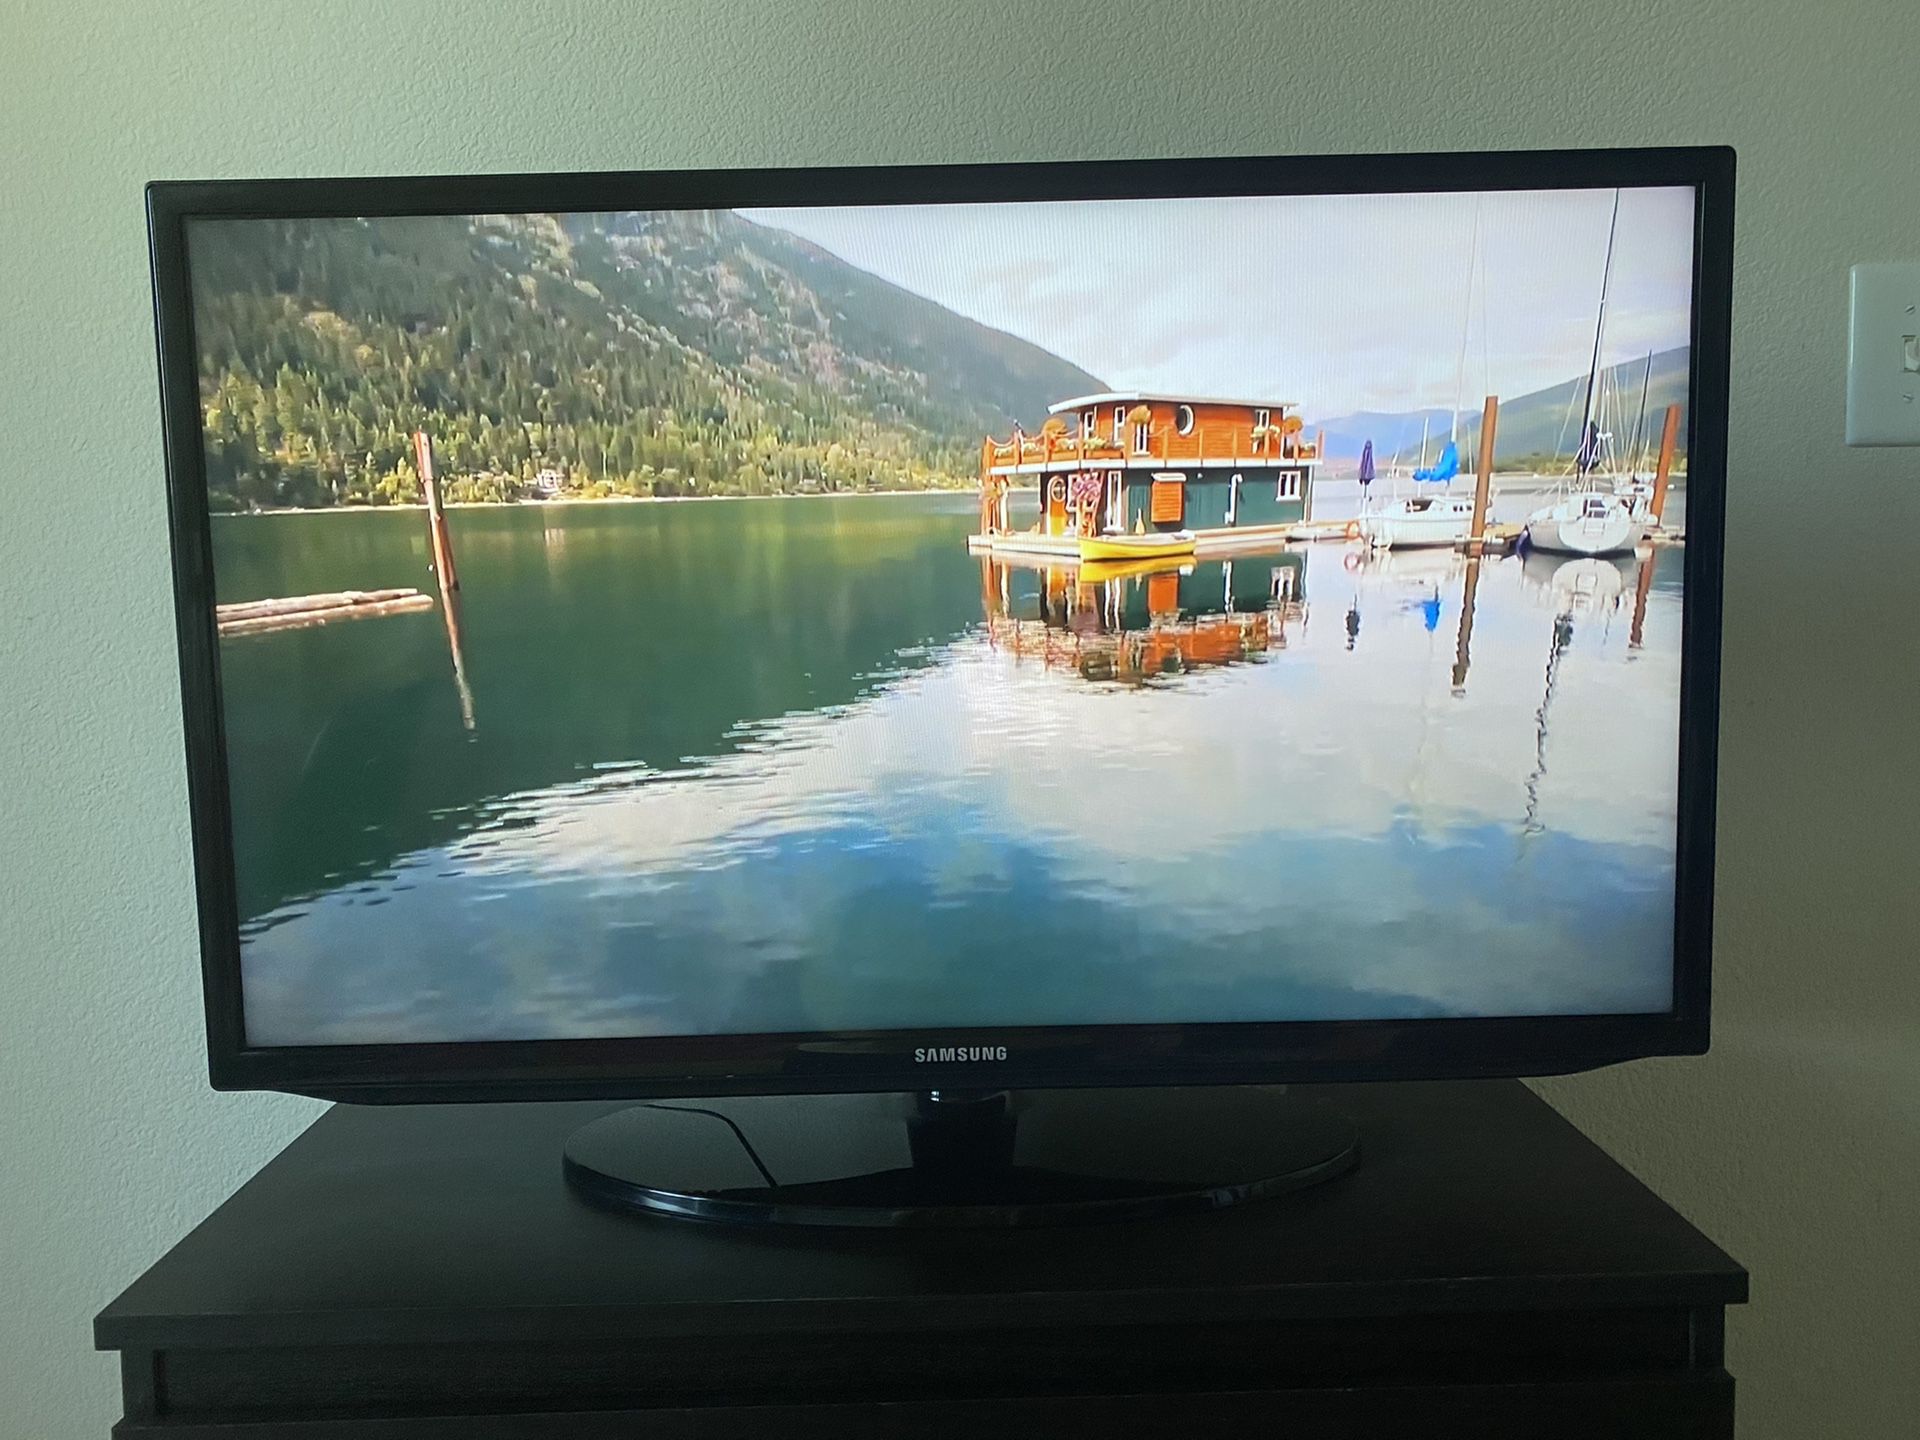 Samsung 32” smart LED tv in very good condition